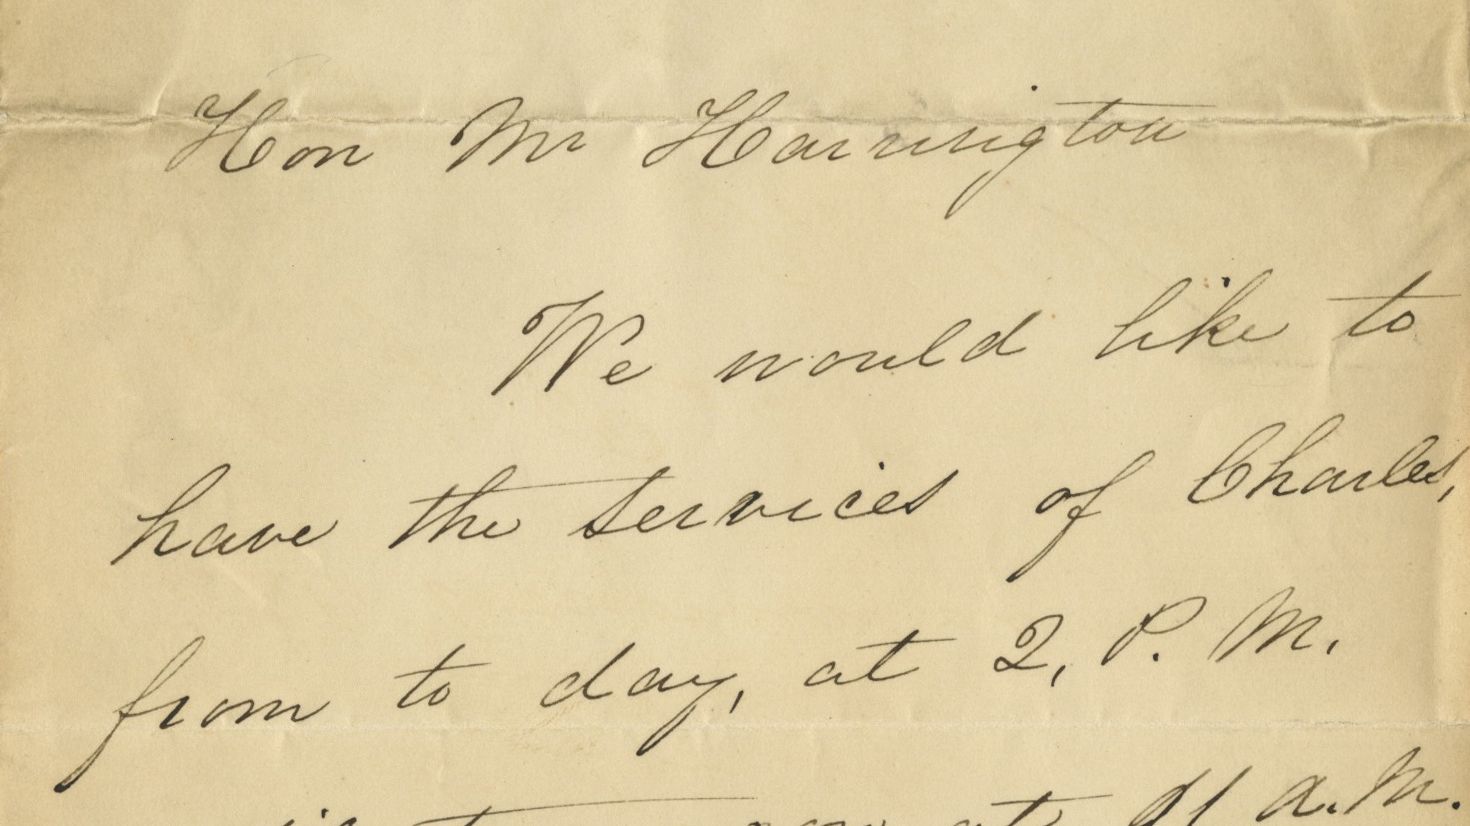 A newly published letter from Mary Todd Lincoln requesting child care for son, Tad.  